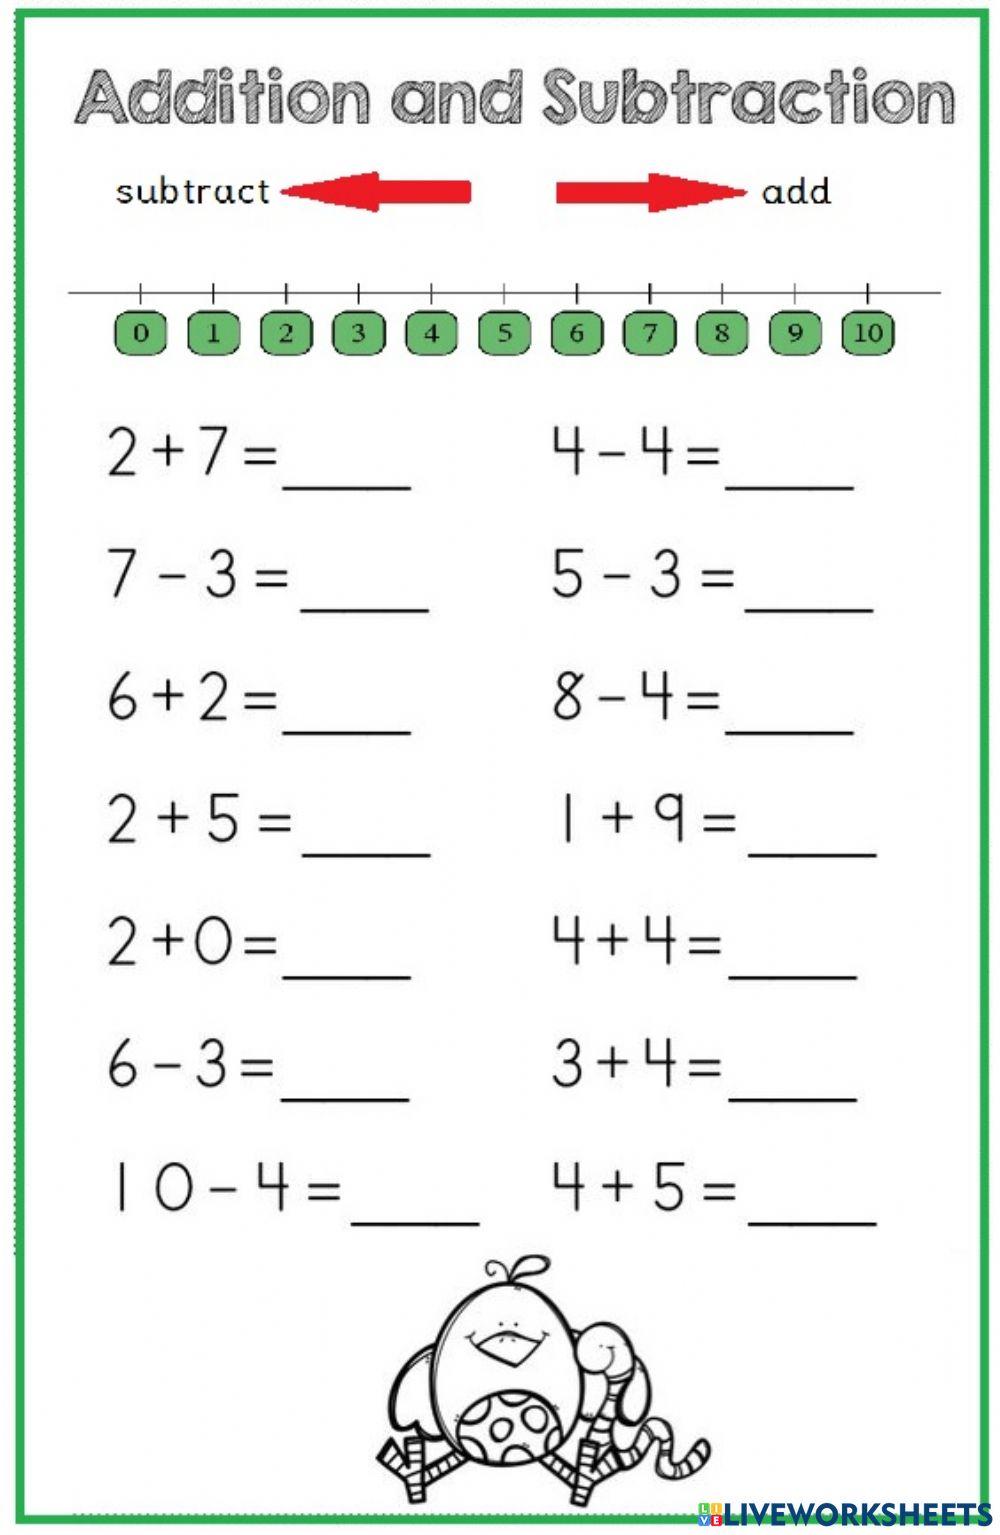 Add and Subtract on Number Line